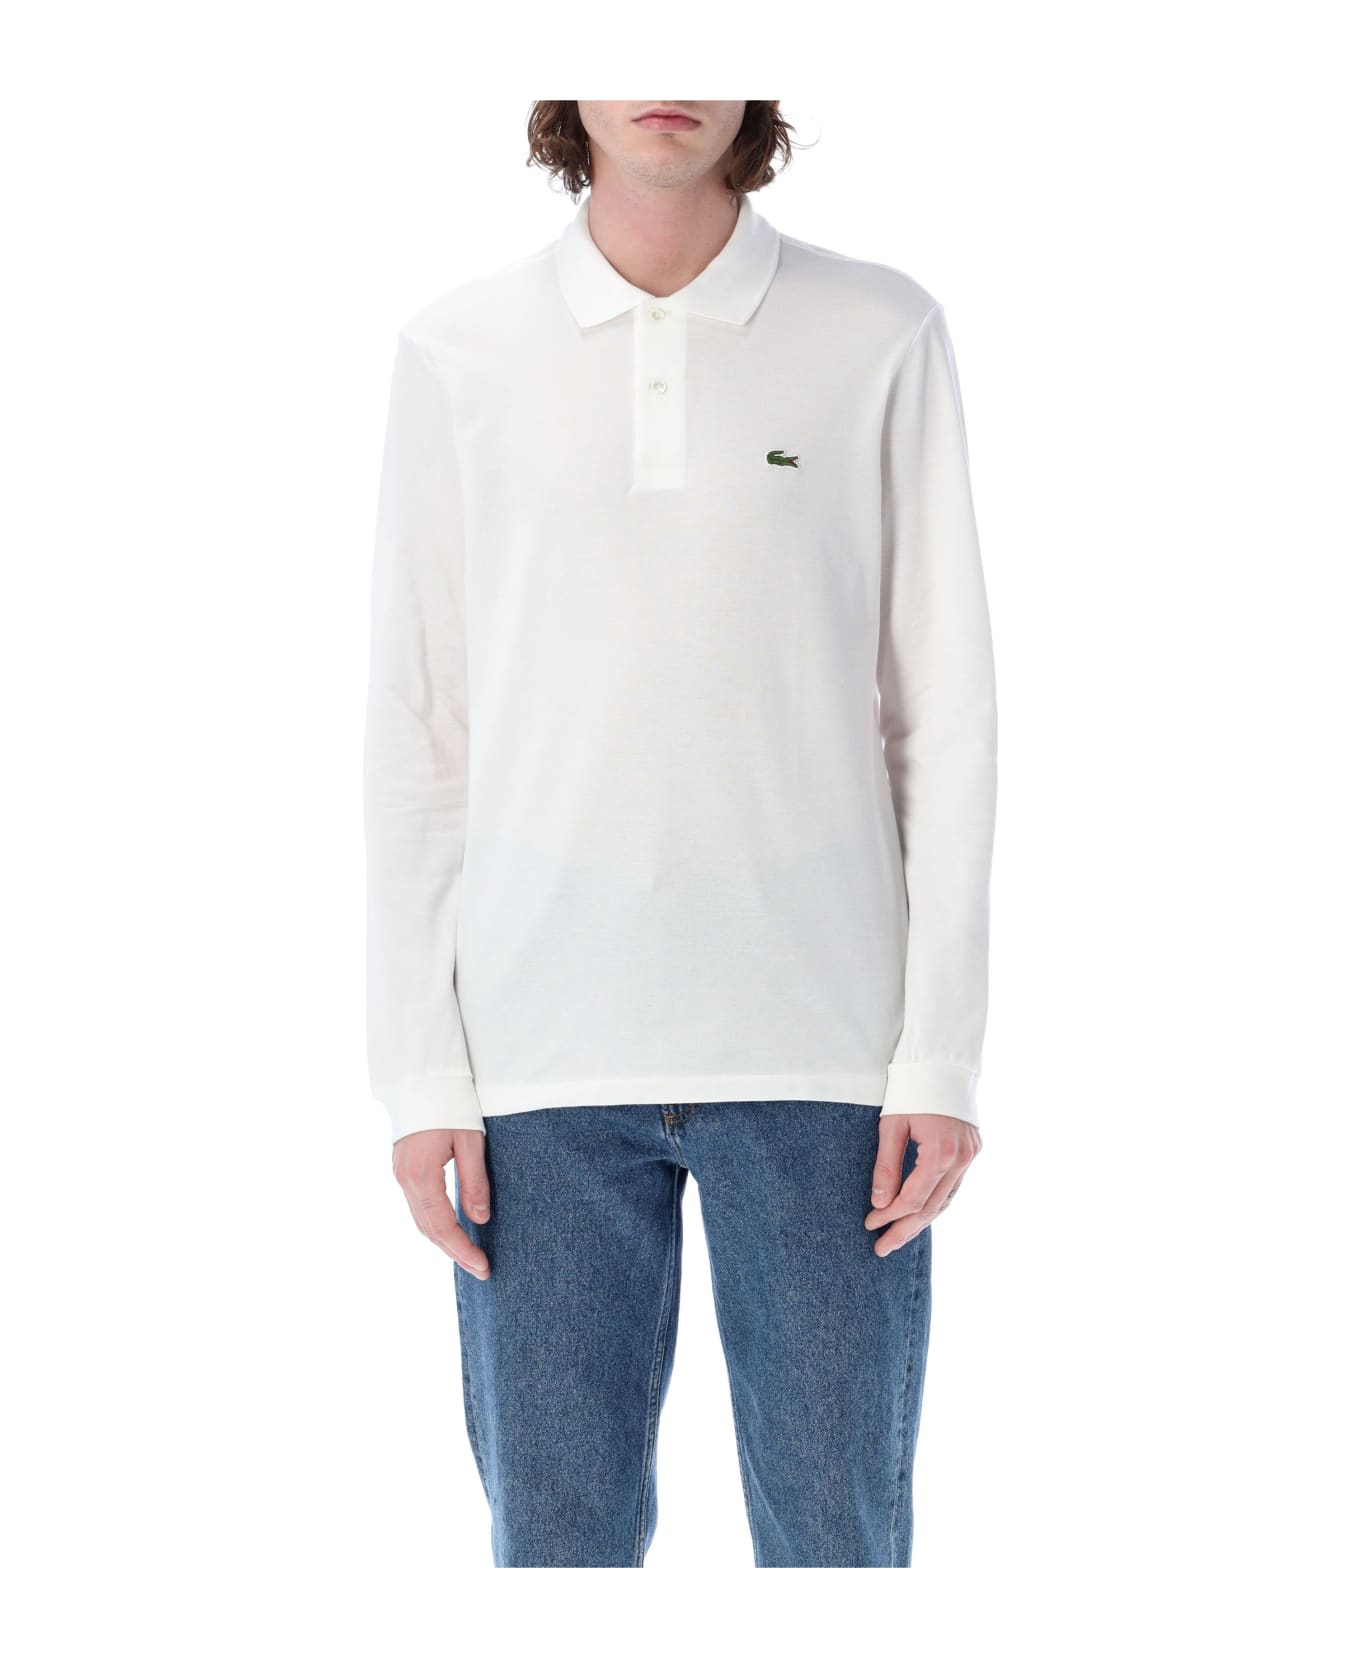 Lacoste Classic Fit L/s Polo Shirt - WHITE ポロシャツ